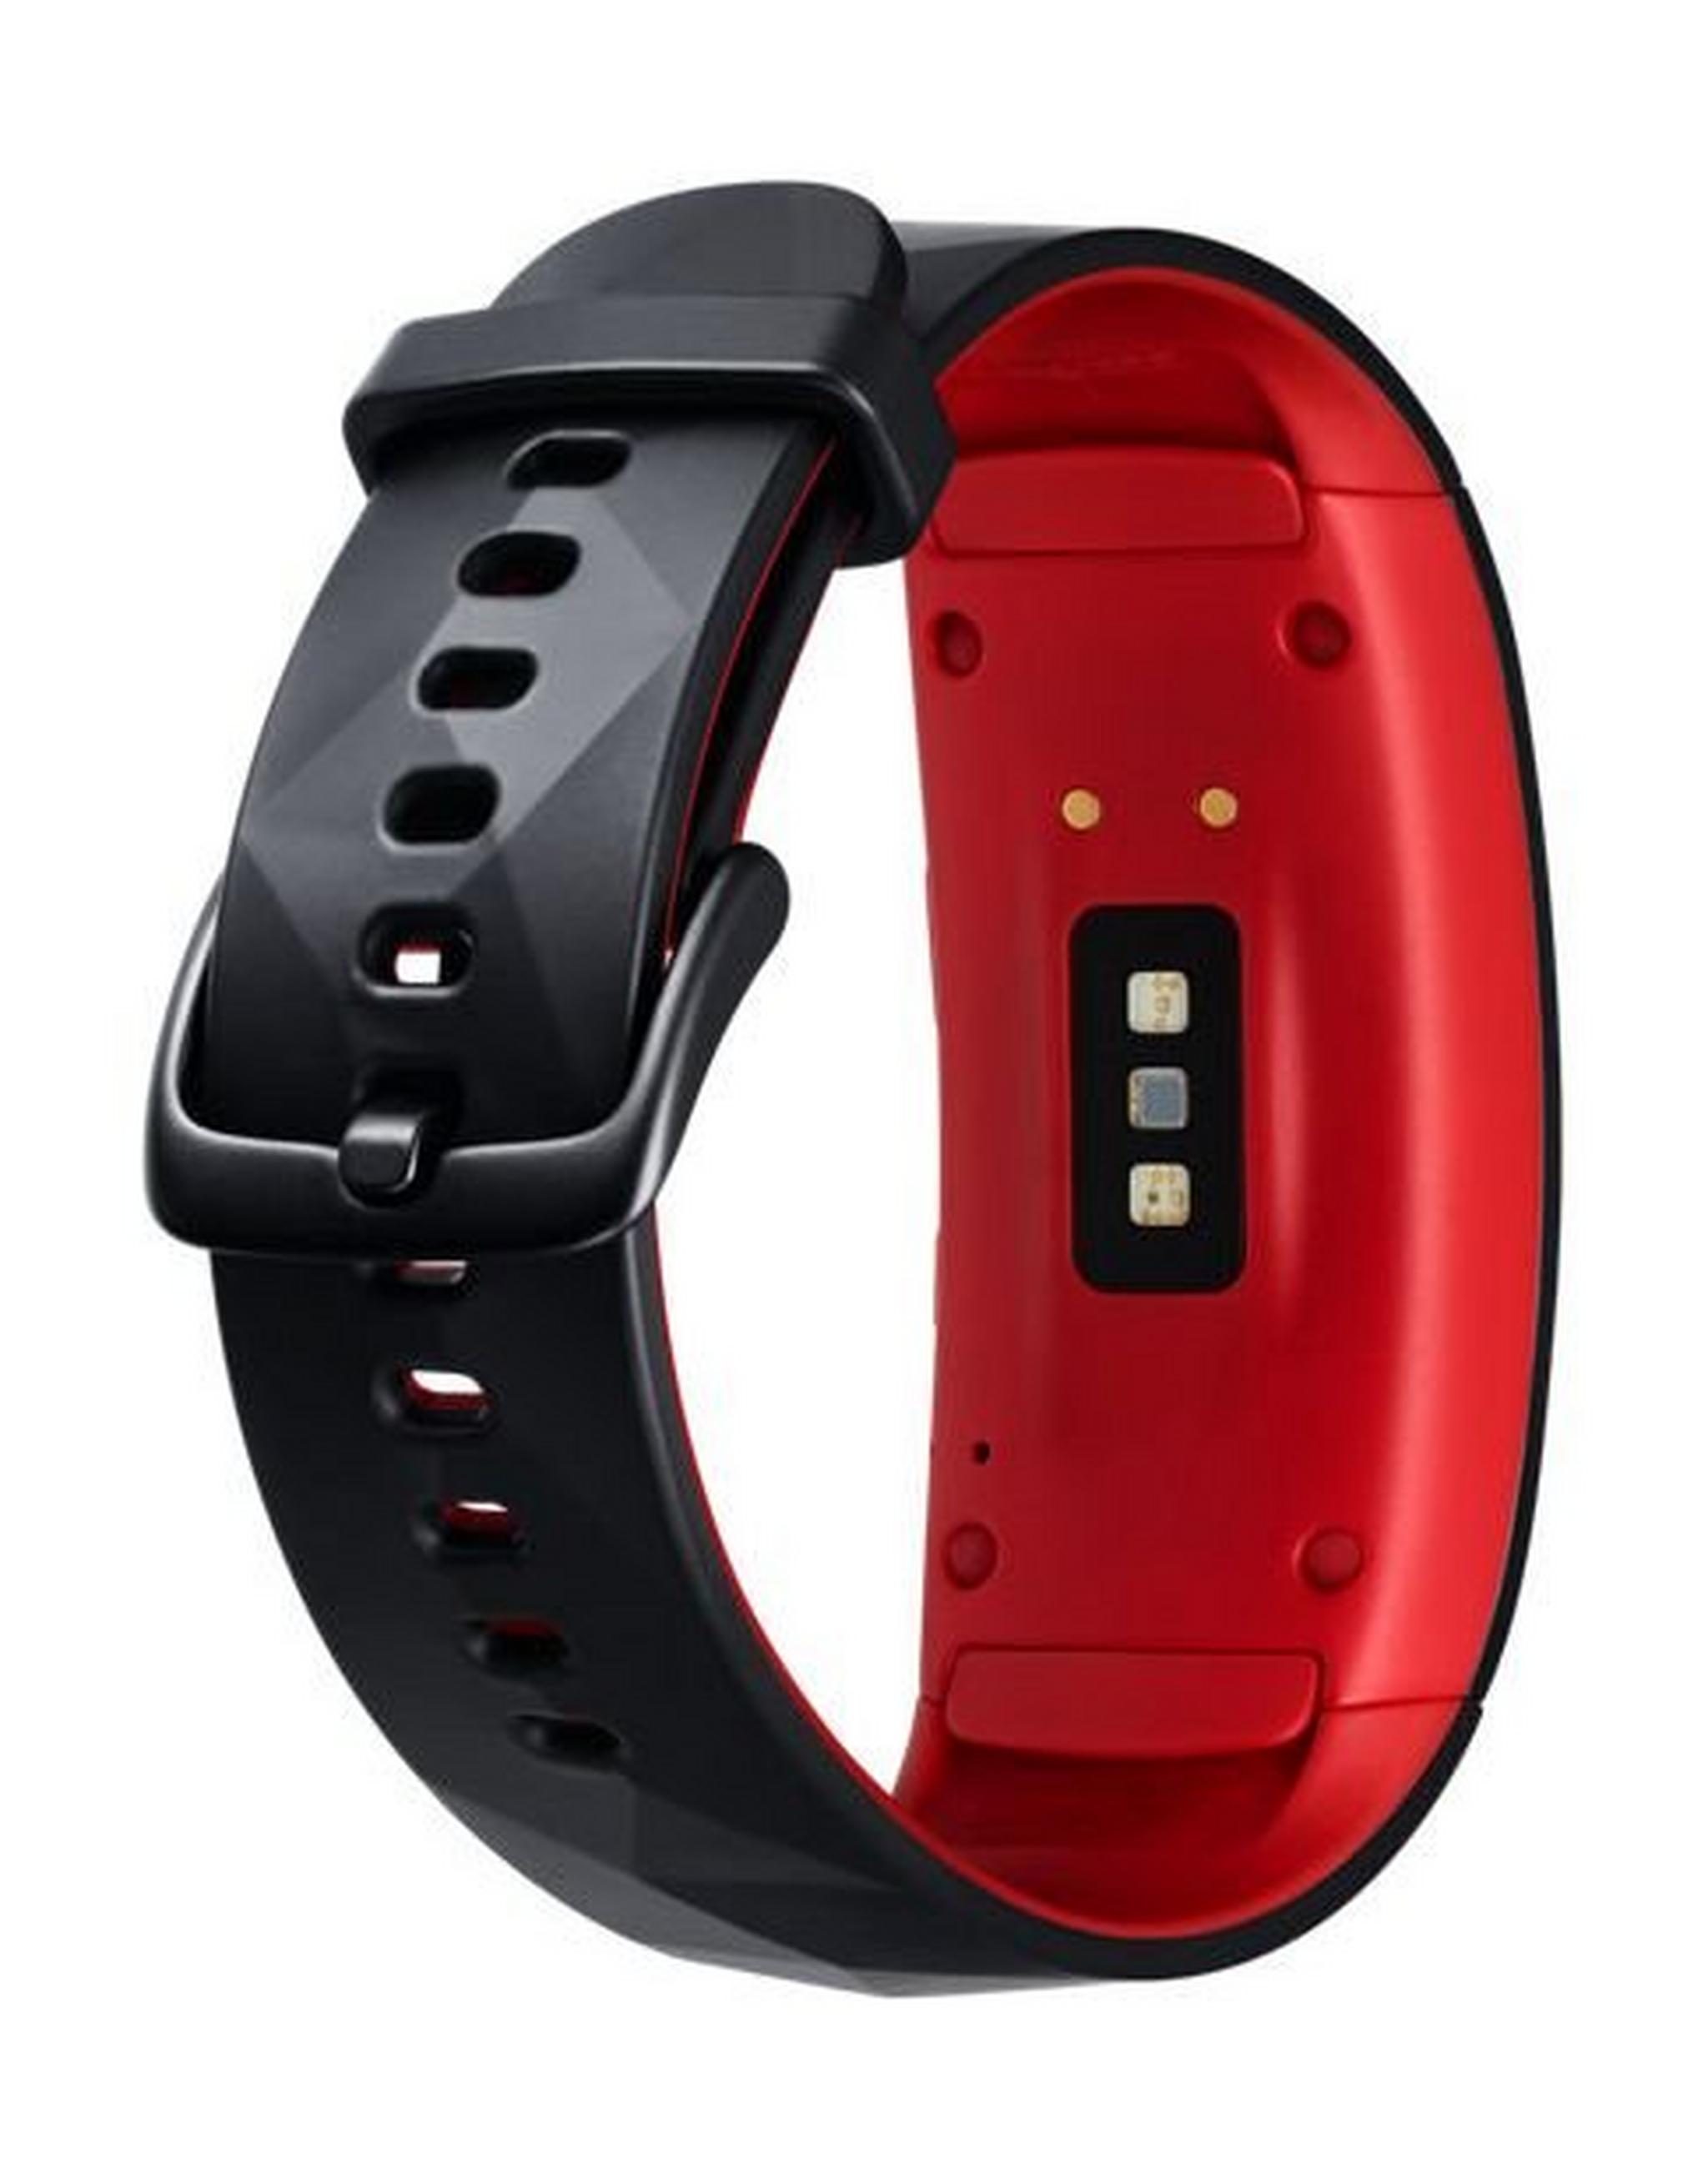 Samsung Gear Fit2 Pro Fitness Watch - Large/Red